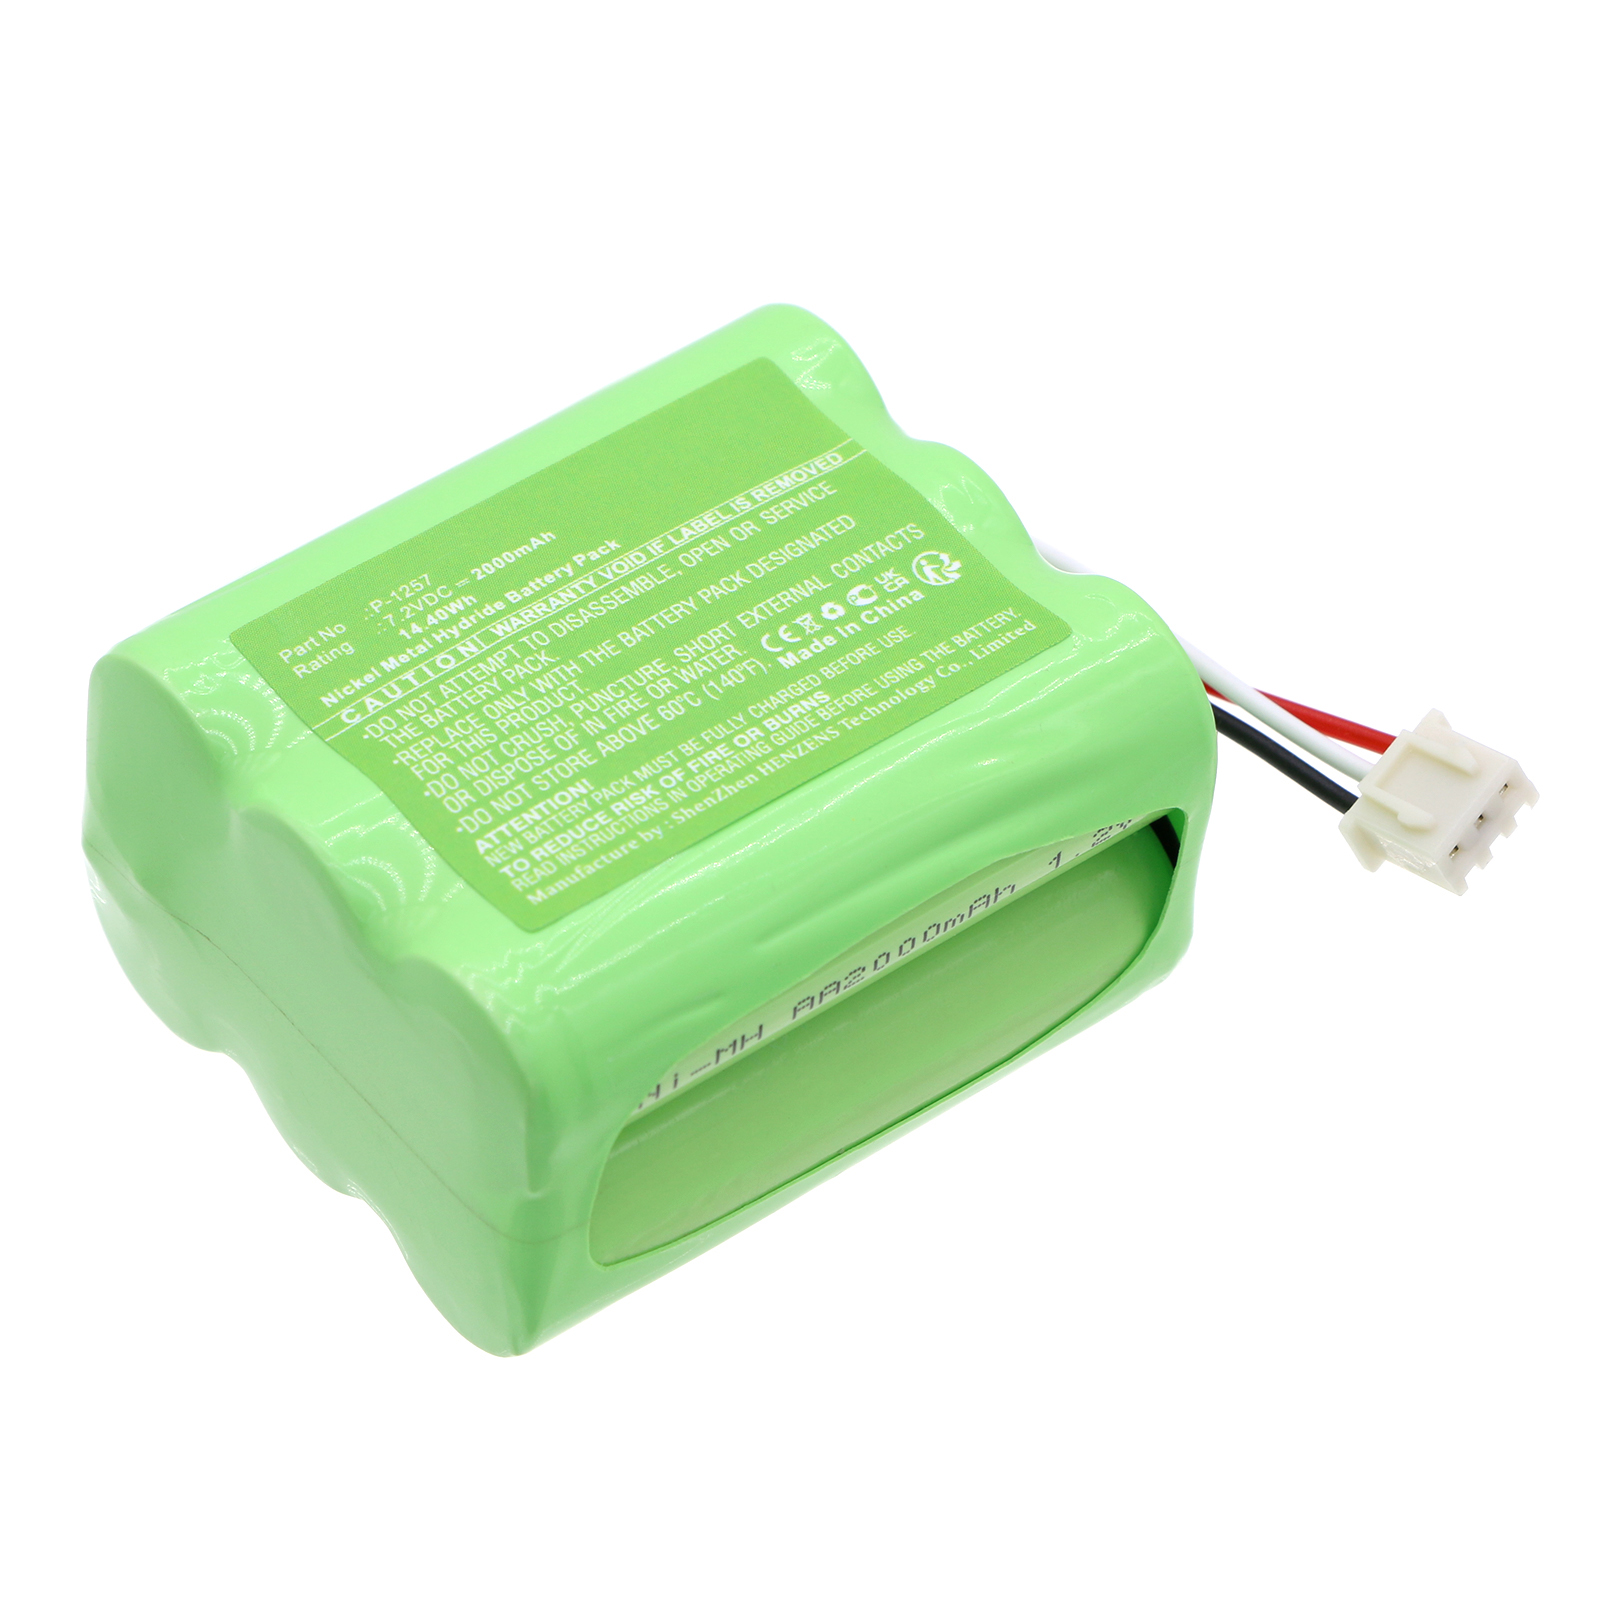 Synergy Digital Cash Register Battery, Compatible with EURO-500 P-1257 Cash Register Battery (Ni-MH, 7.2V, 2000mAh)